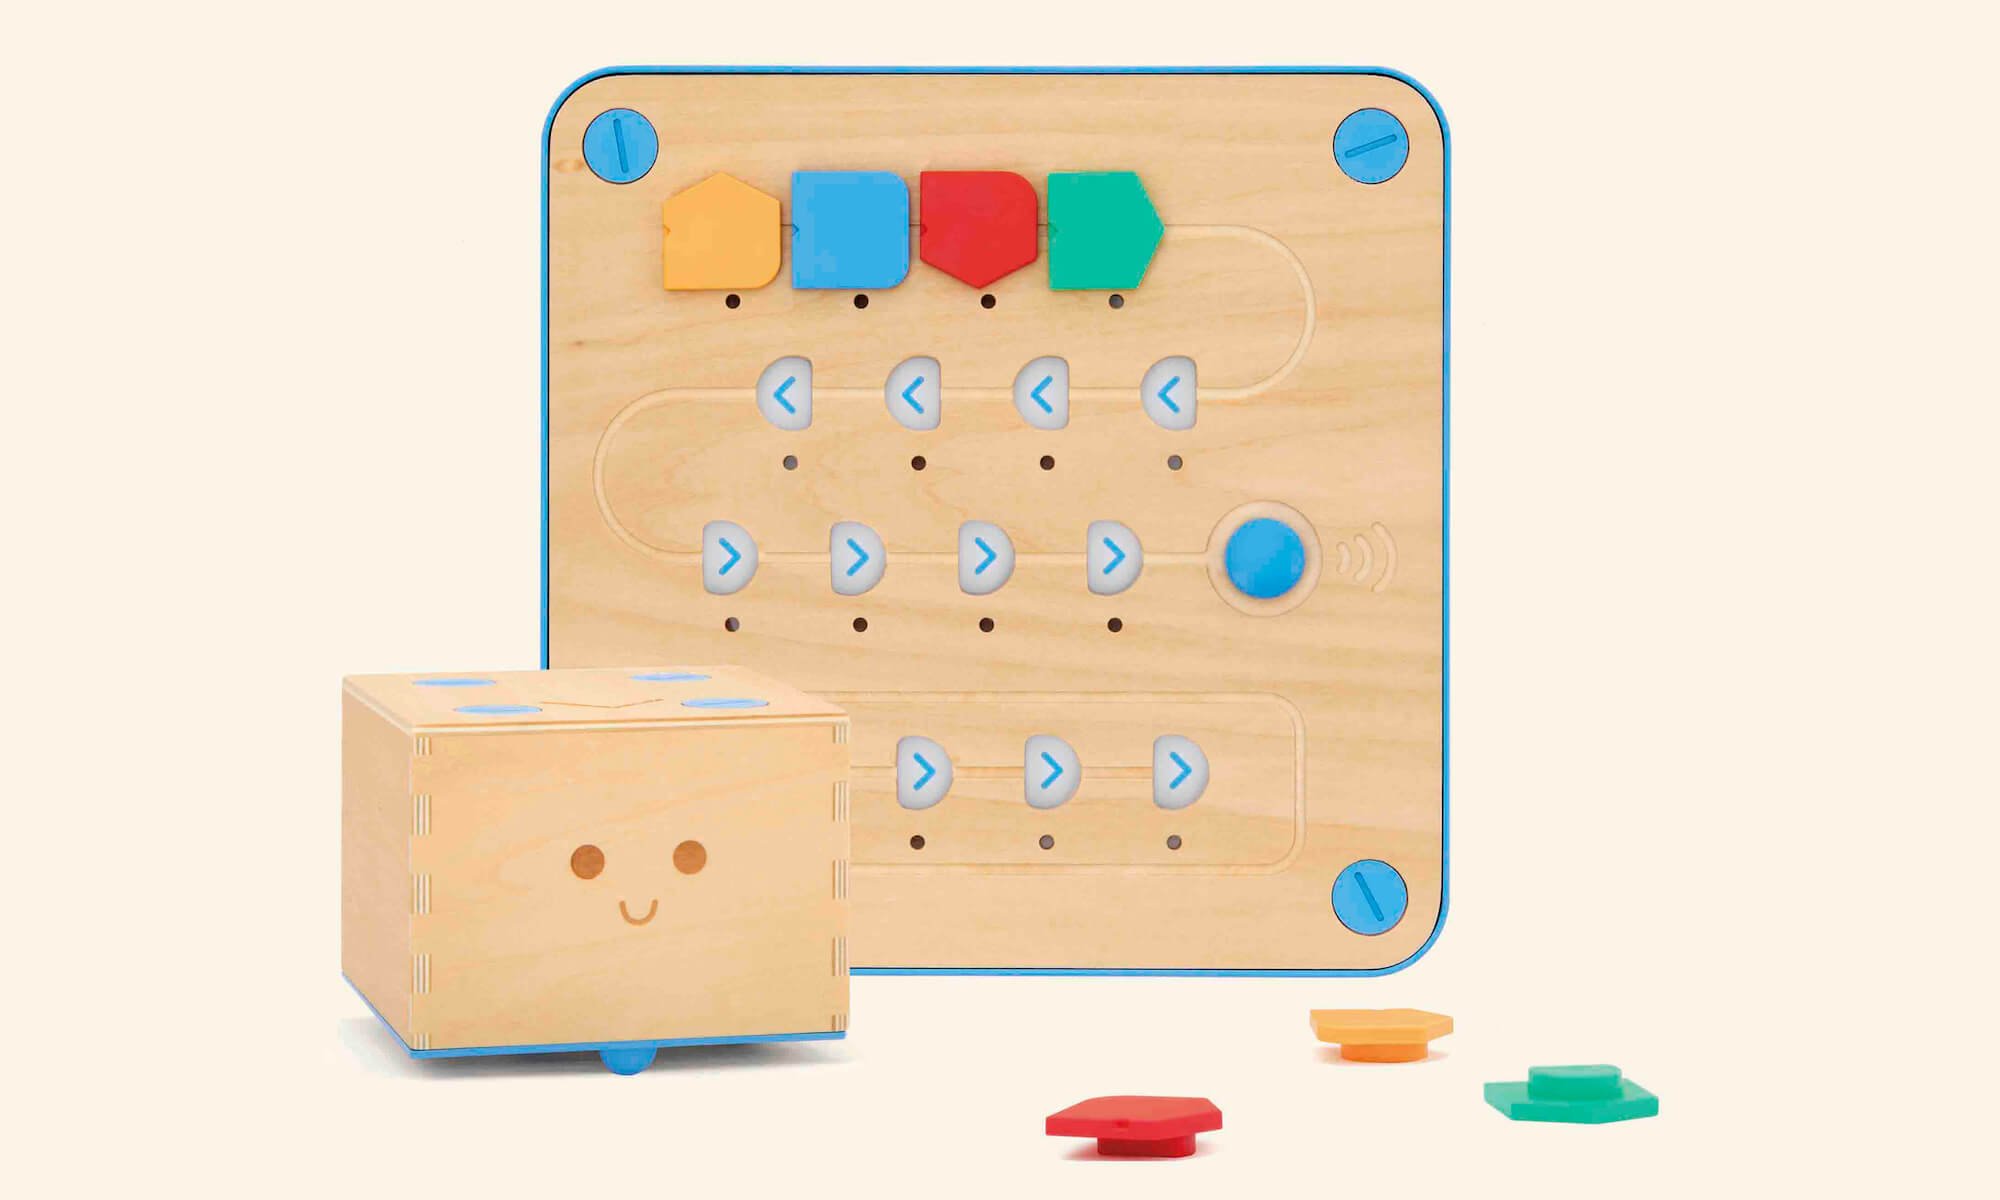 A render of the Cubetto from edtech company Primo Toys